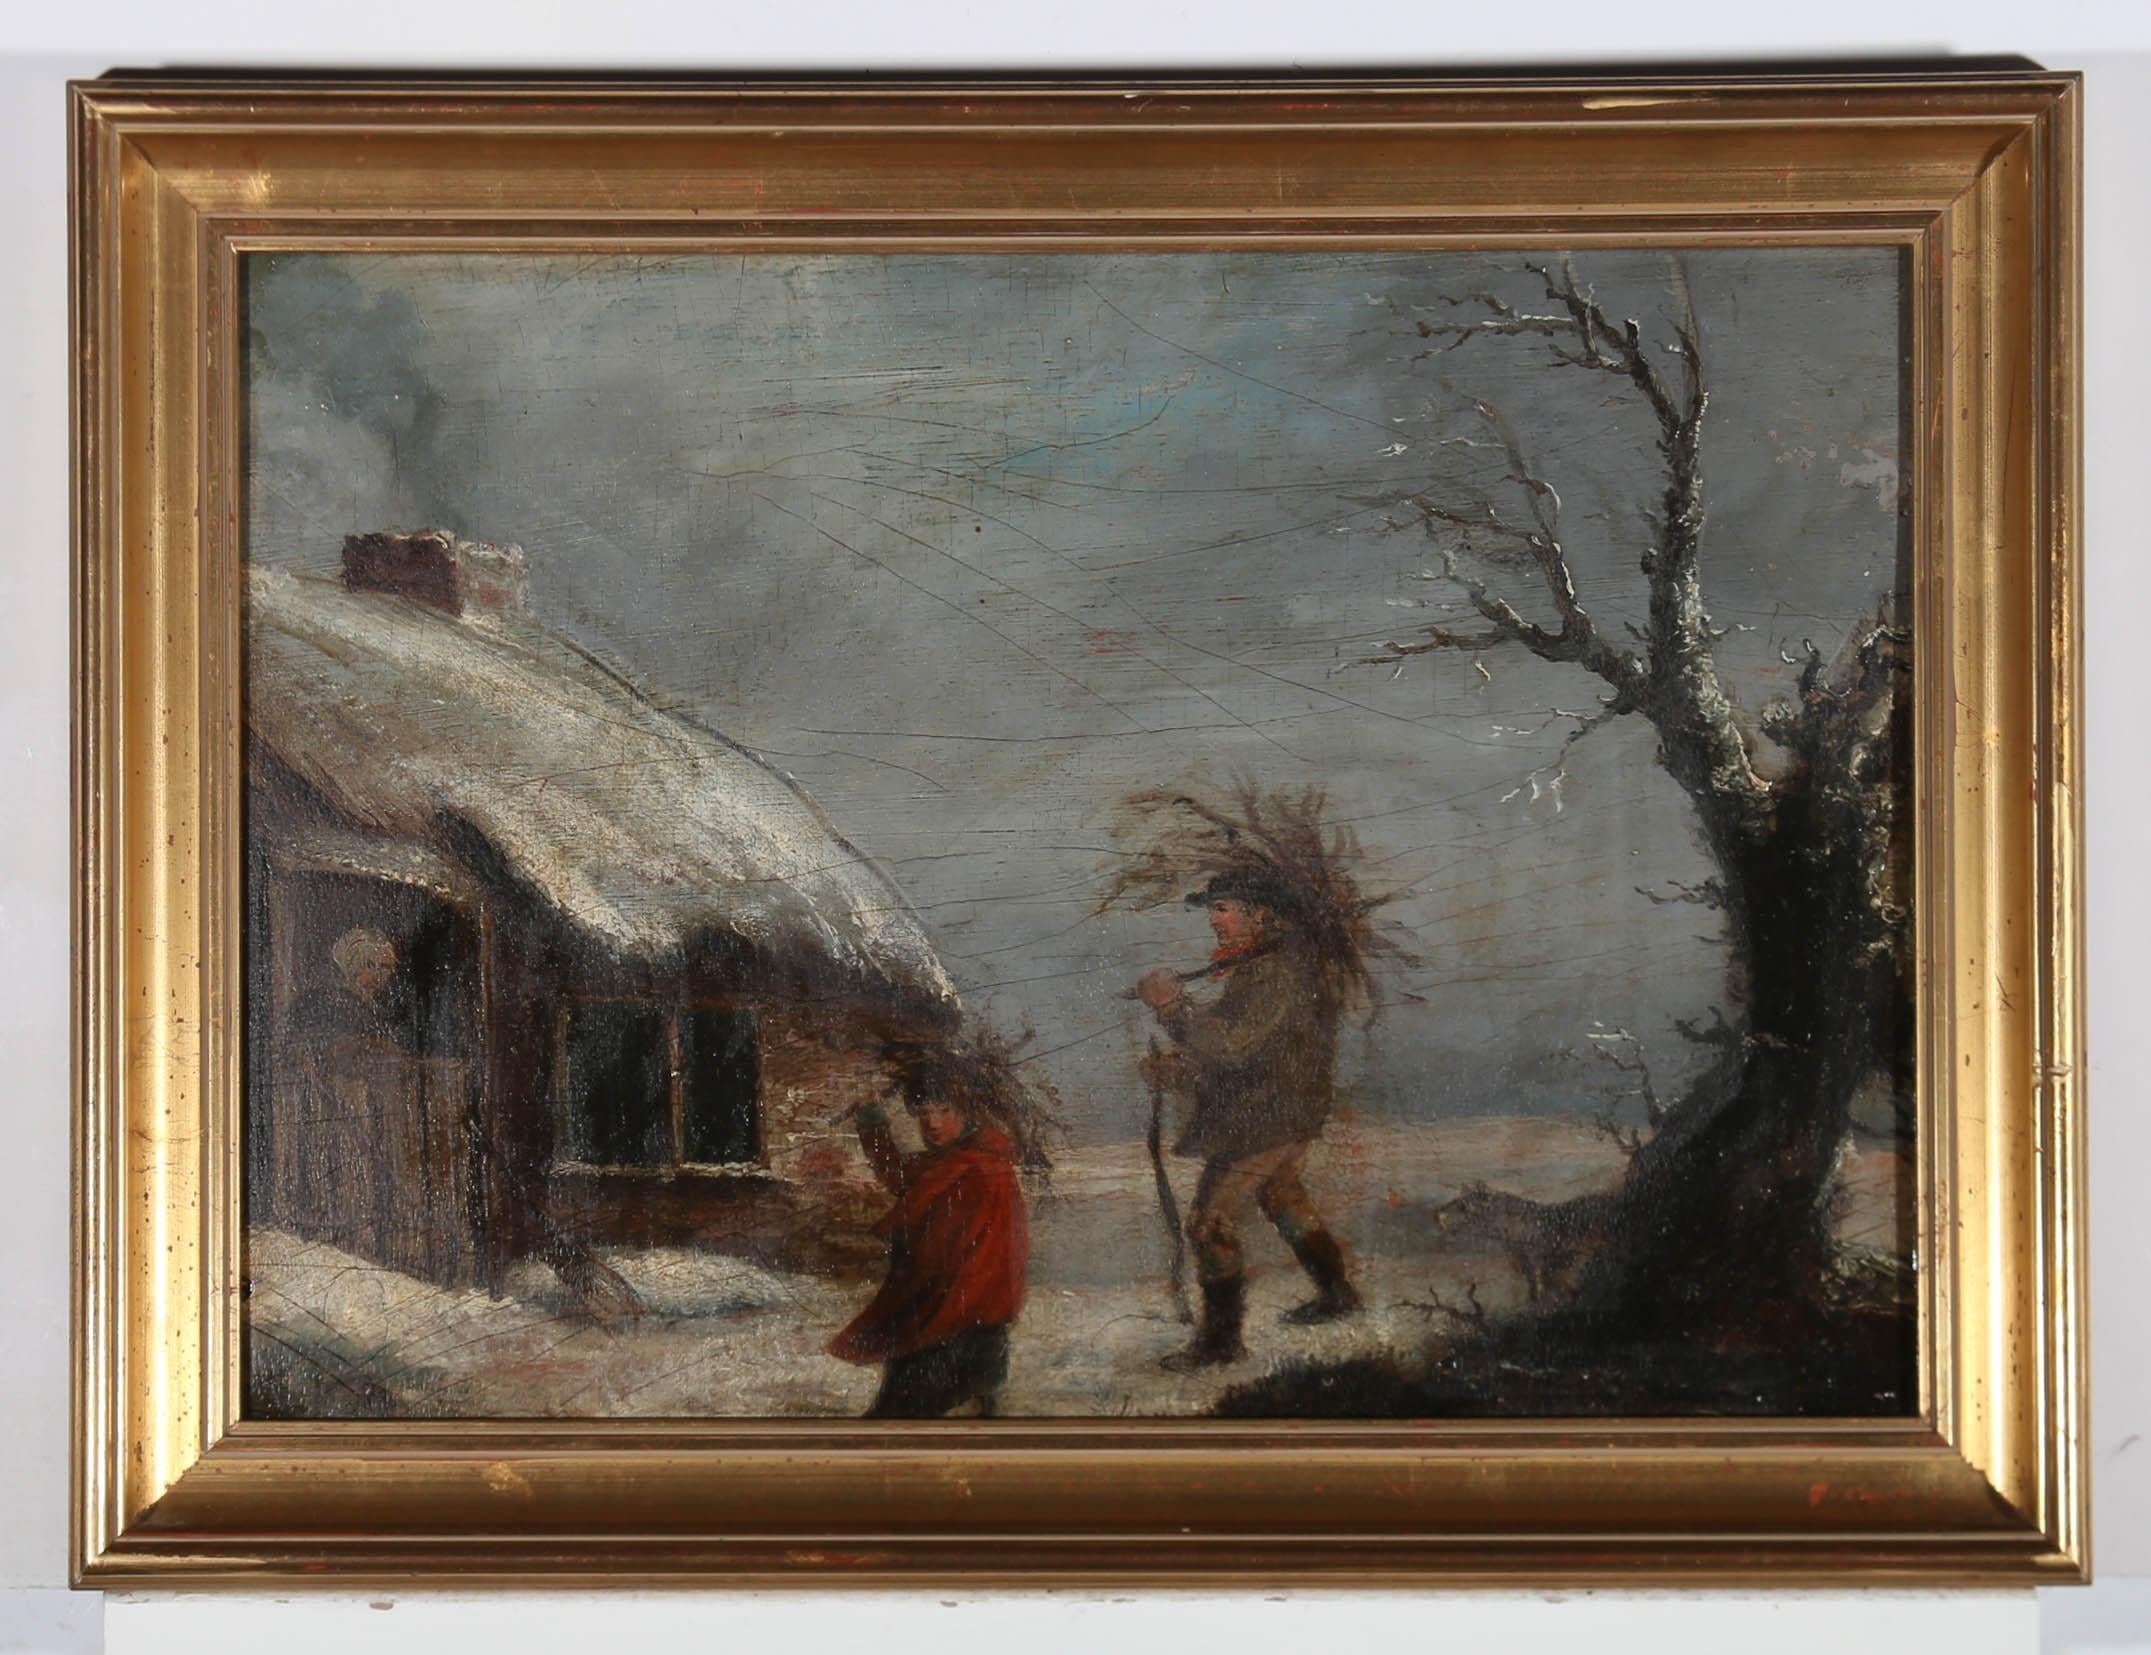 A thoroughly charming 19th Century naive English School oil showing a rural scene with a man and his son returning home to their snow covered cottage with bundles of kindling on the shoulders and their faithful little dog following behind. The young